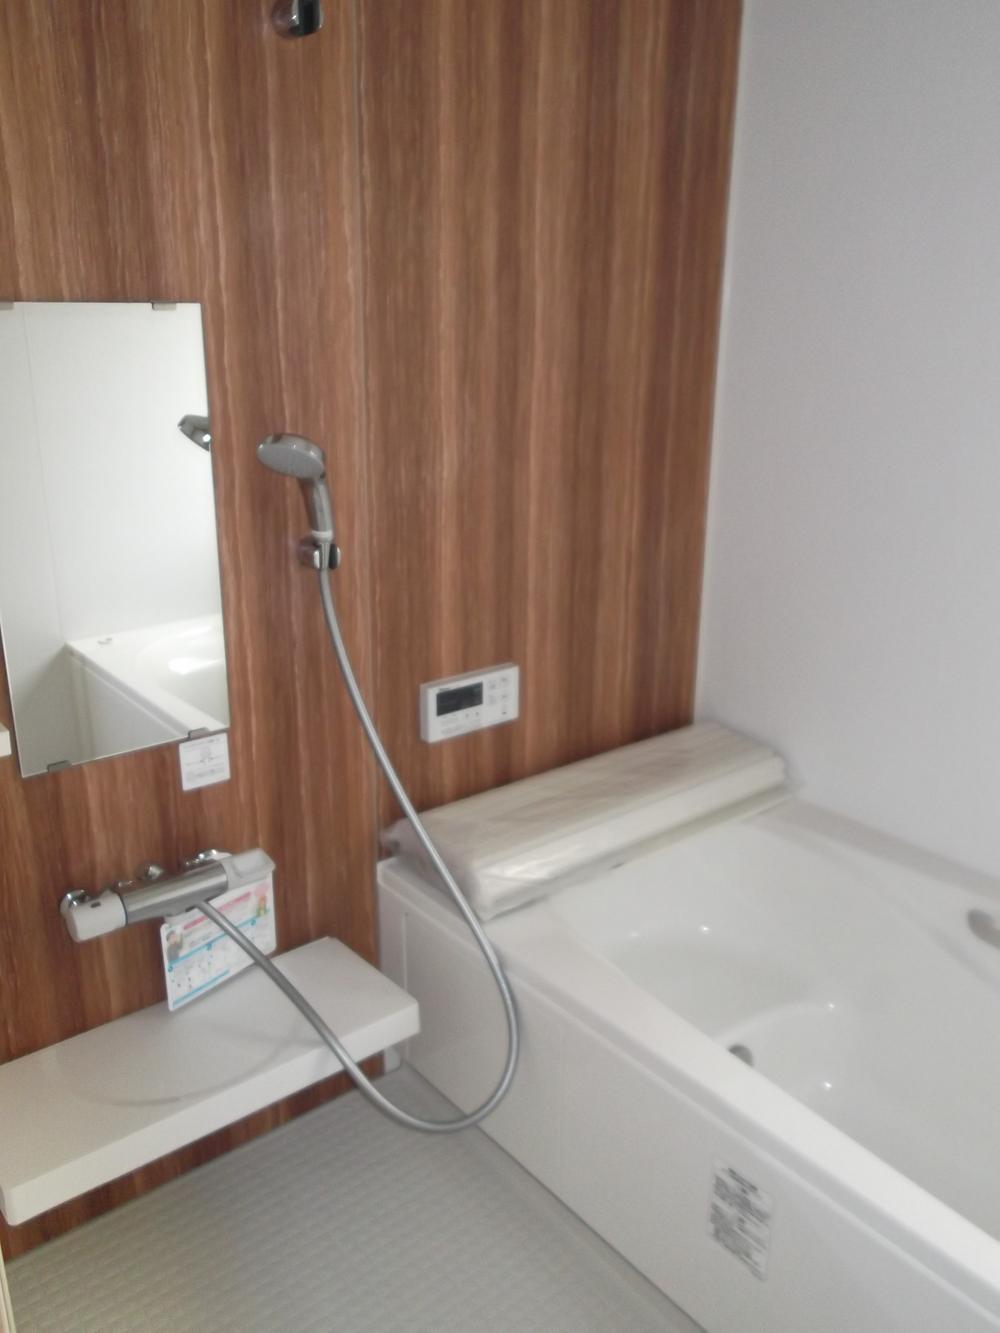 Same specifications photo (bathroom). Same specification bathroom (the color of the panel may vary) Bathroom dryer is standard. 